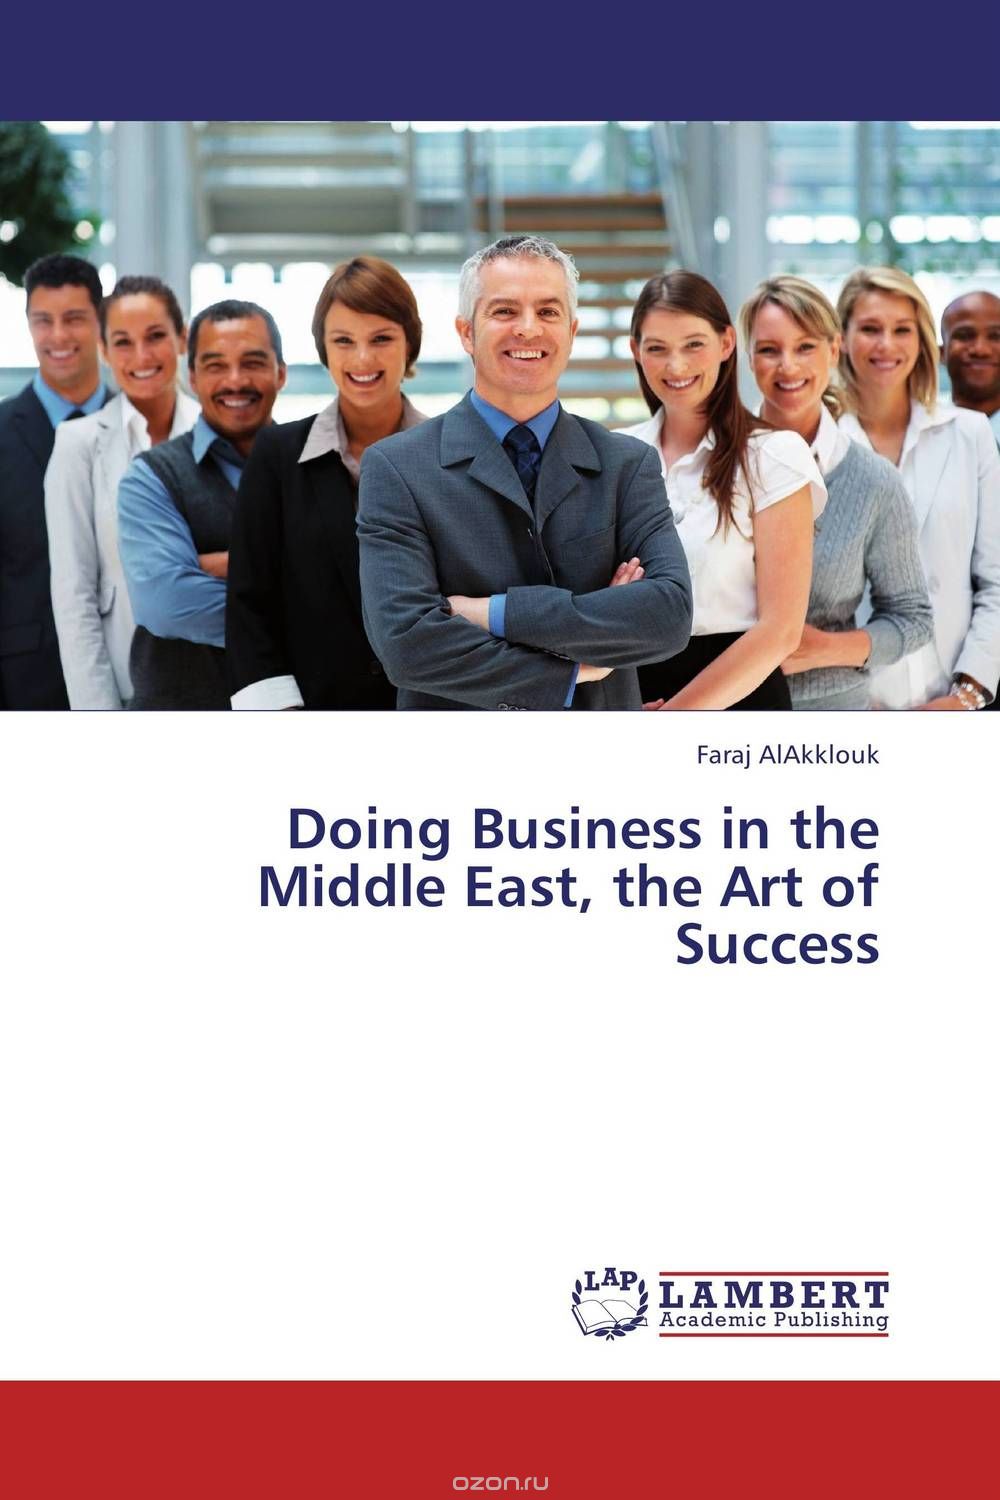 Doing Business in the Middle East, the Art of Success